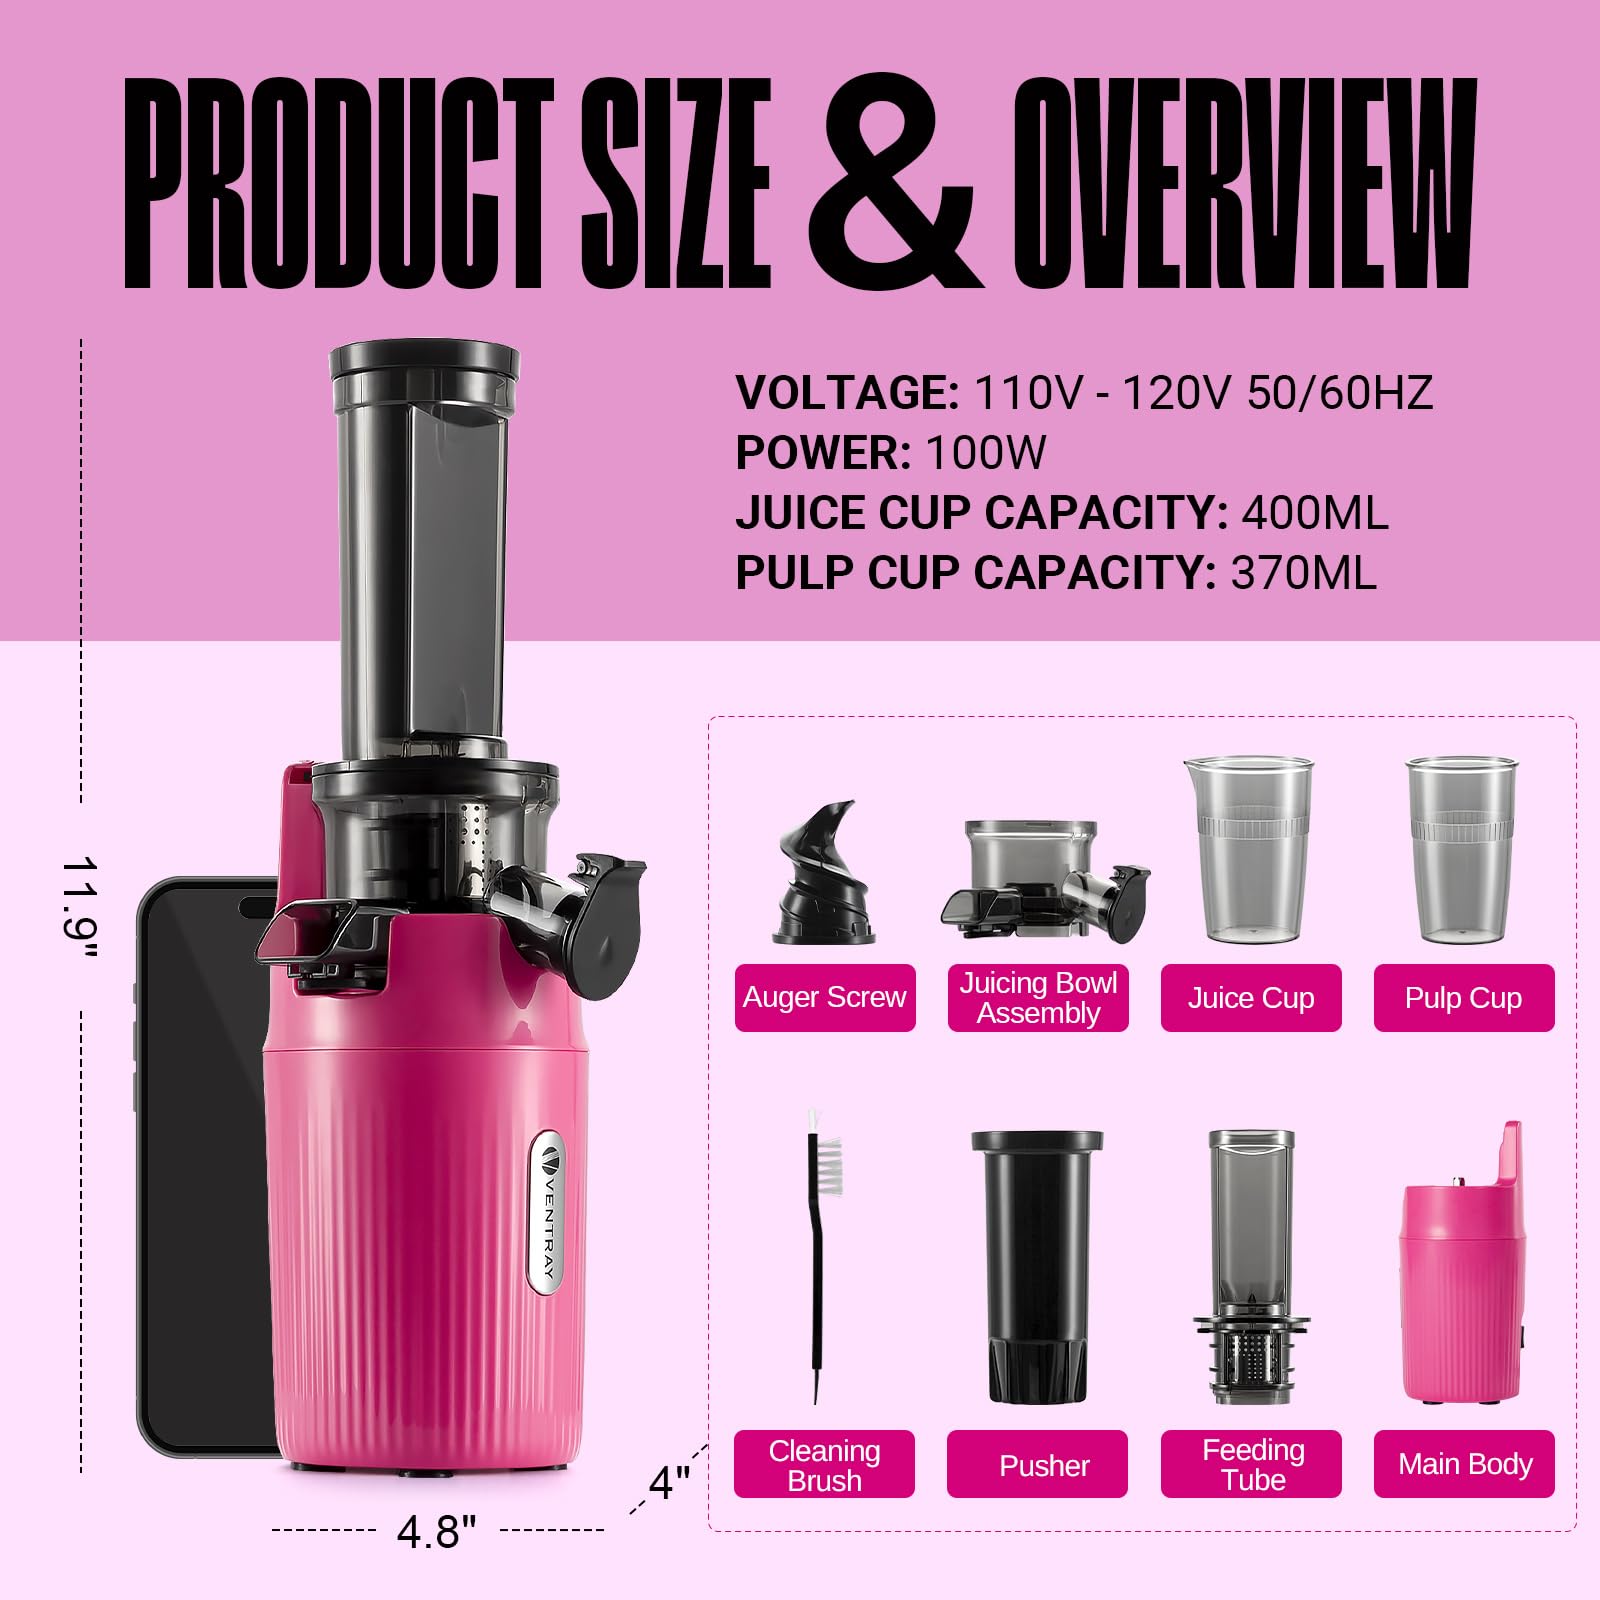 Ventray Ginnie Juicer, Compact Small Cold Press Juicer, Slow Masticating Juicer with 60RPM Low Speed,Space-Saving Juice Extractor, Easy to Clean, Nutrient Vitamin Dense, Eco-Friendly Packaging- Pink